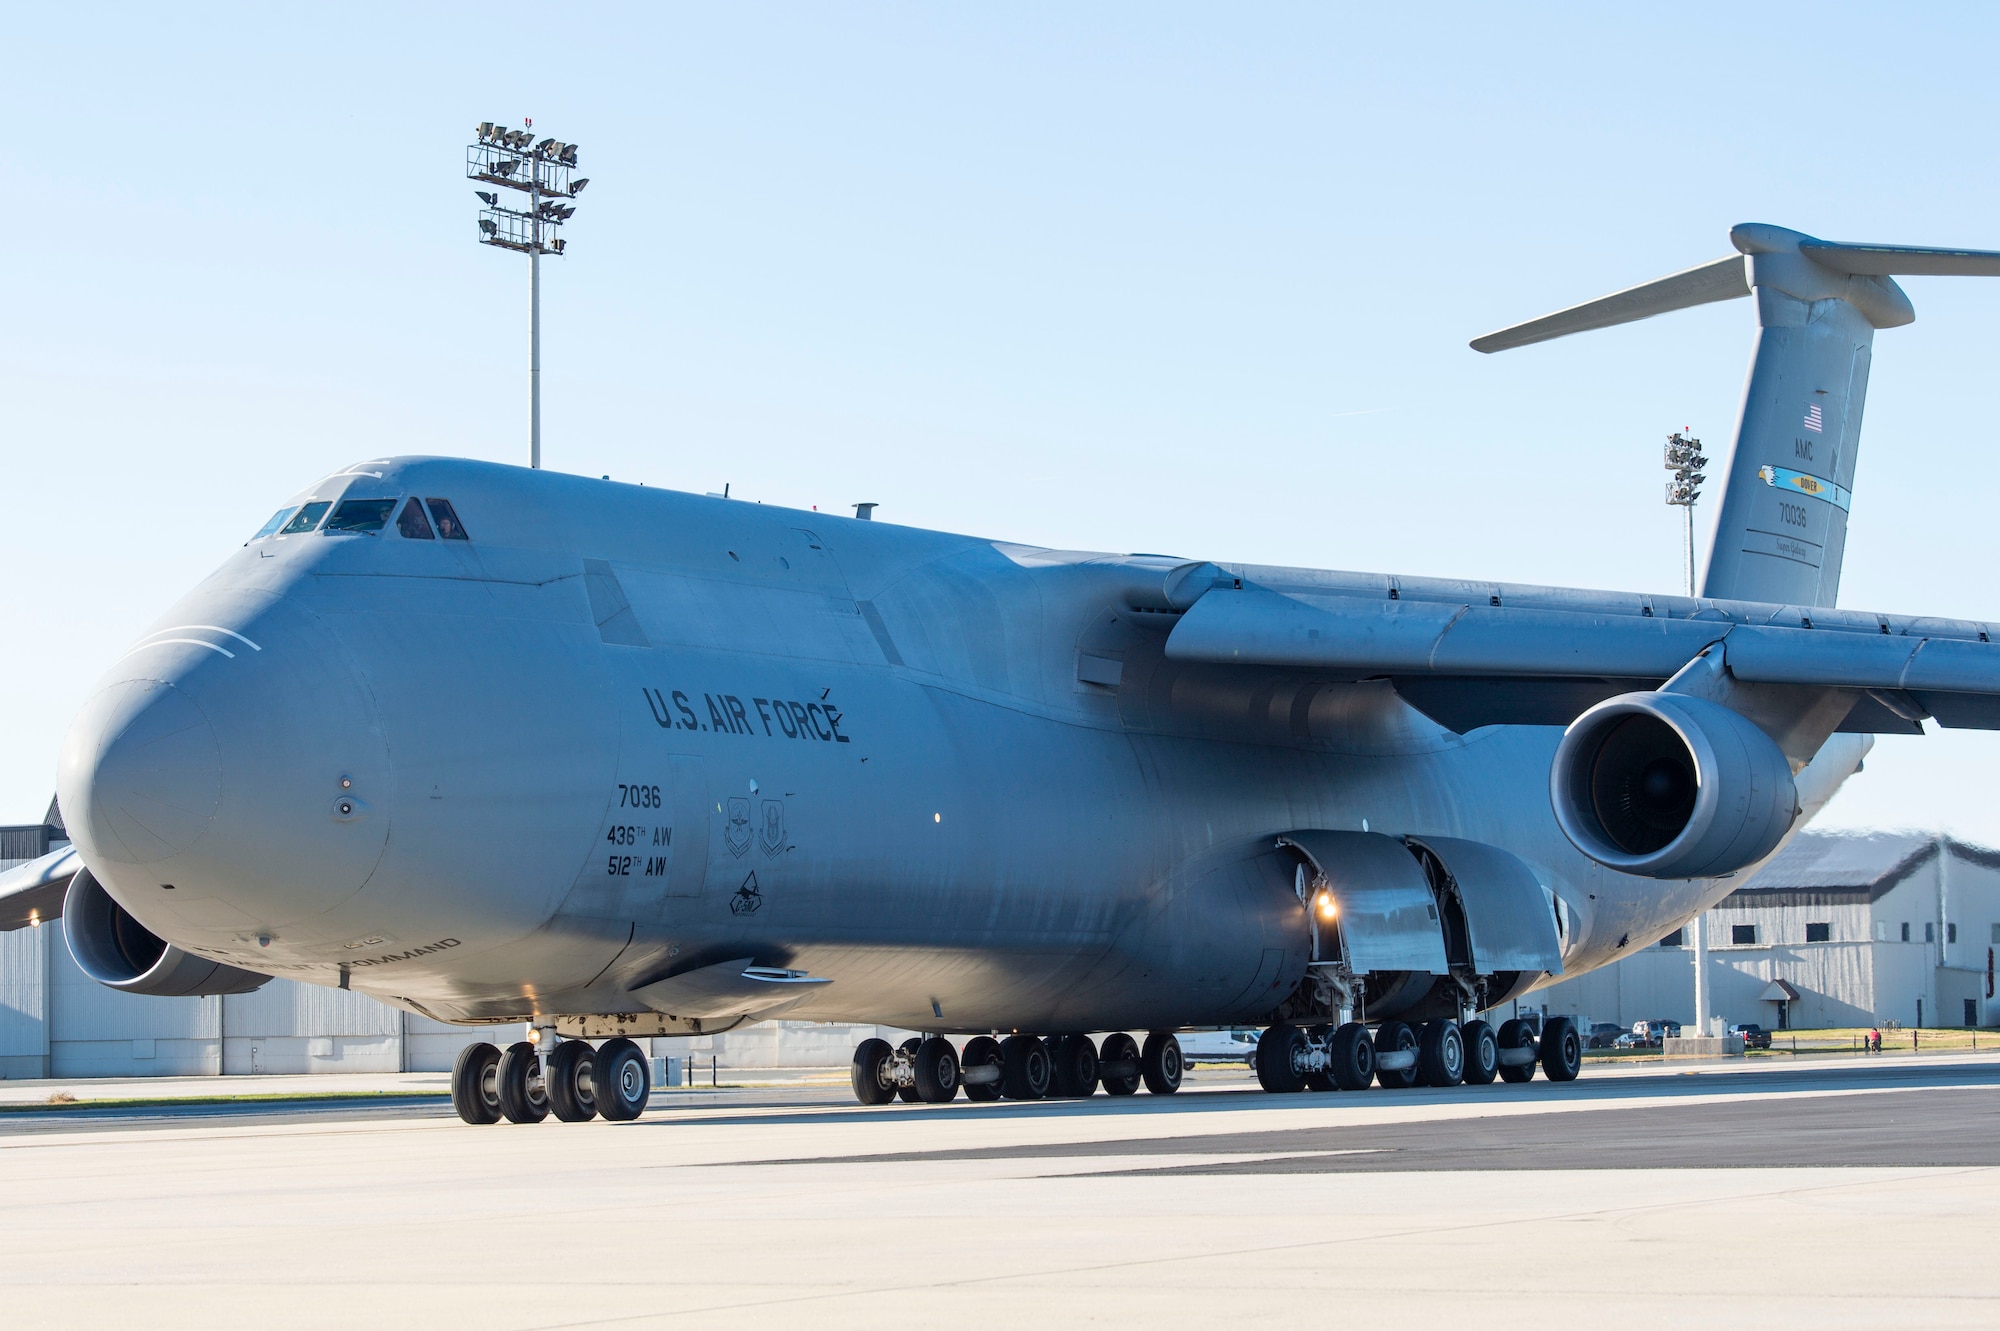 A C-5M Super Galaxy taxis down the flight line prior to takeoff at Dover Air Force Base, Delaware, Dec. 20, 2021. Eighteen C-5M's are assigned to Dover AFB, along with 13 C-17 Globemaster IIIs that provide 20 percent of the nation's outsized airlift capacity. (U.S. Air Force photo by Roland Balik)